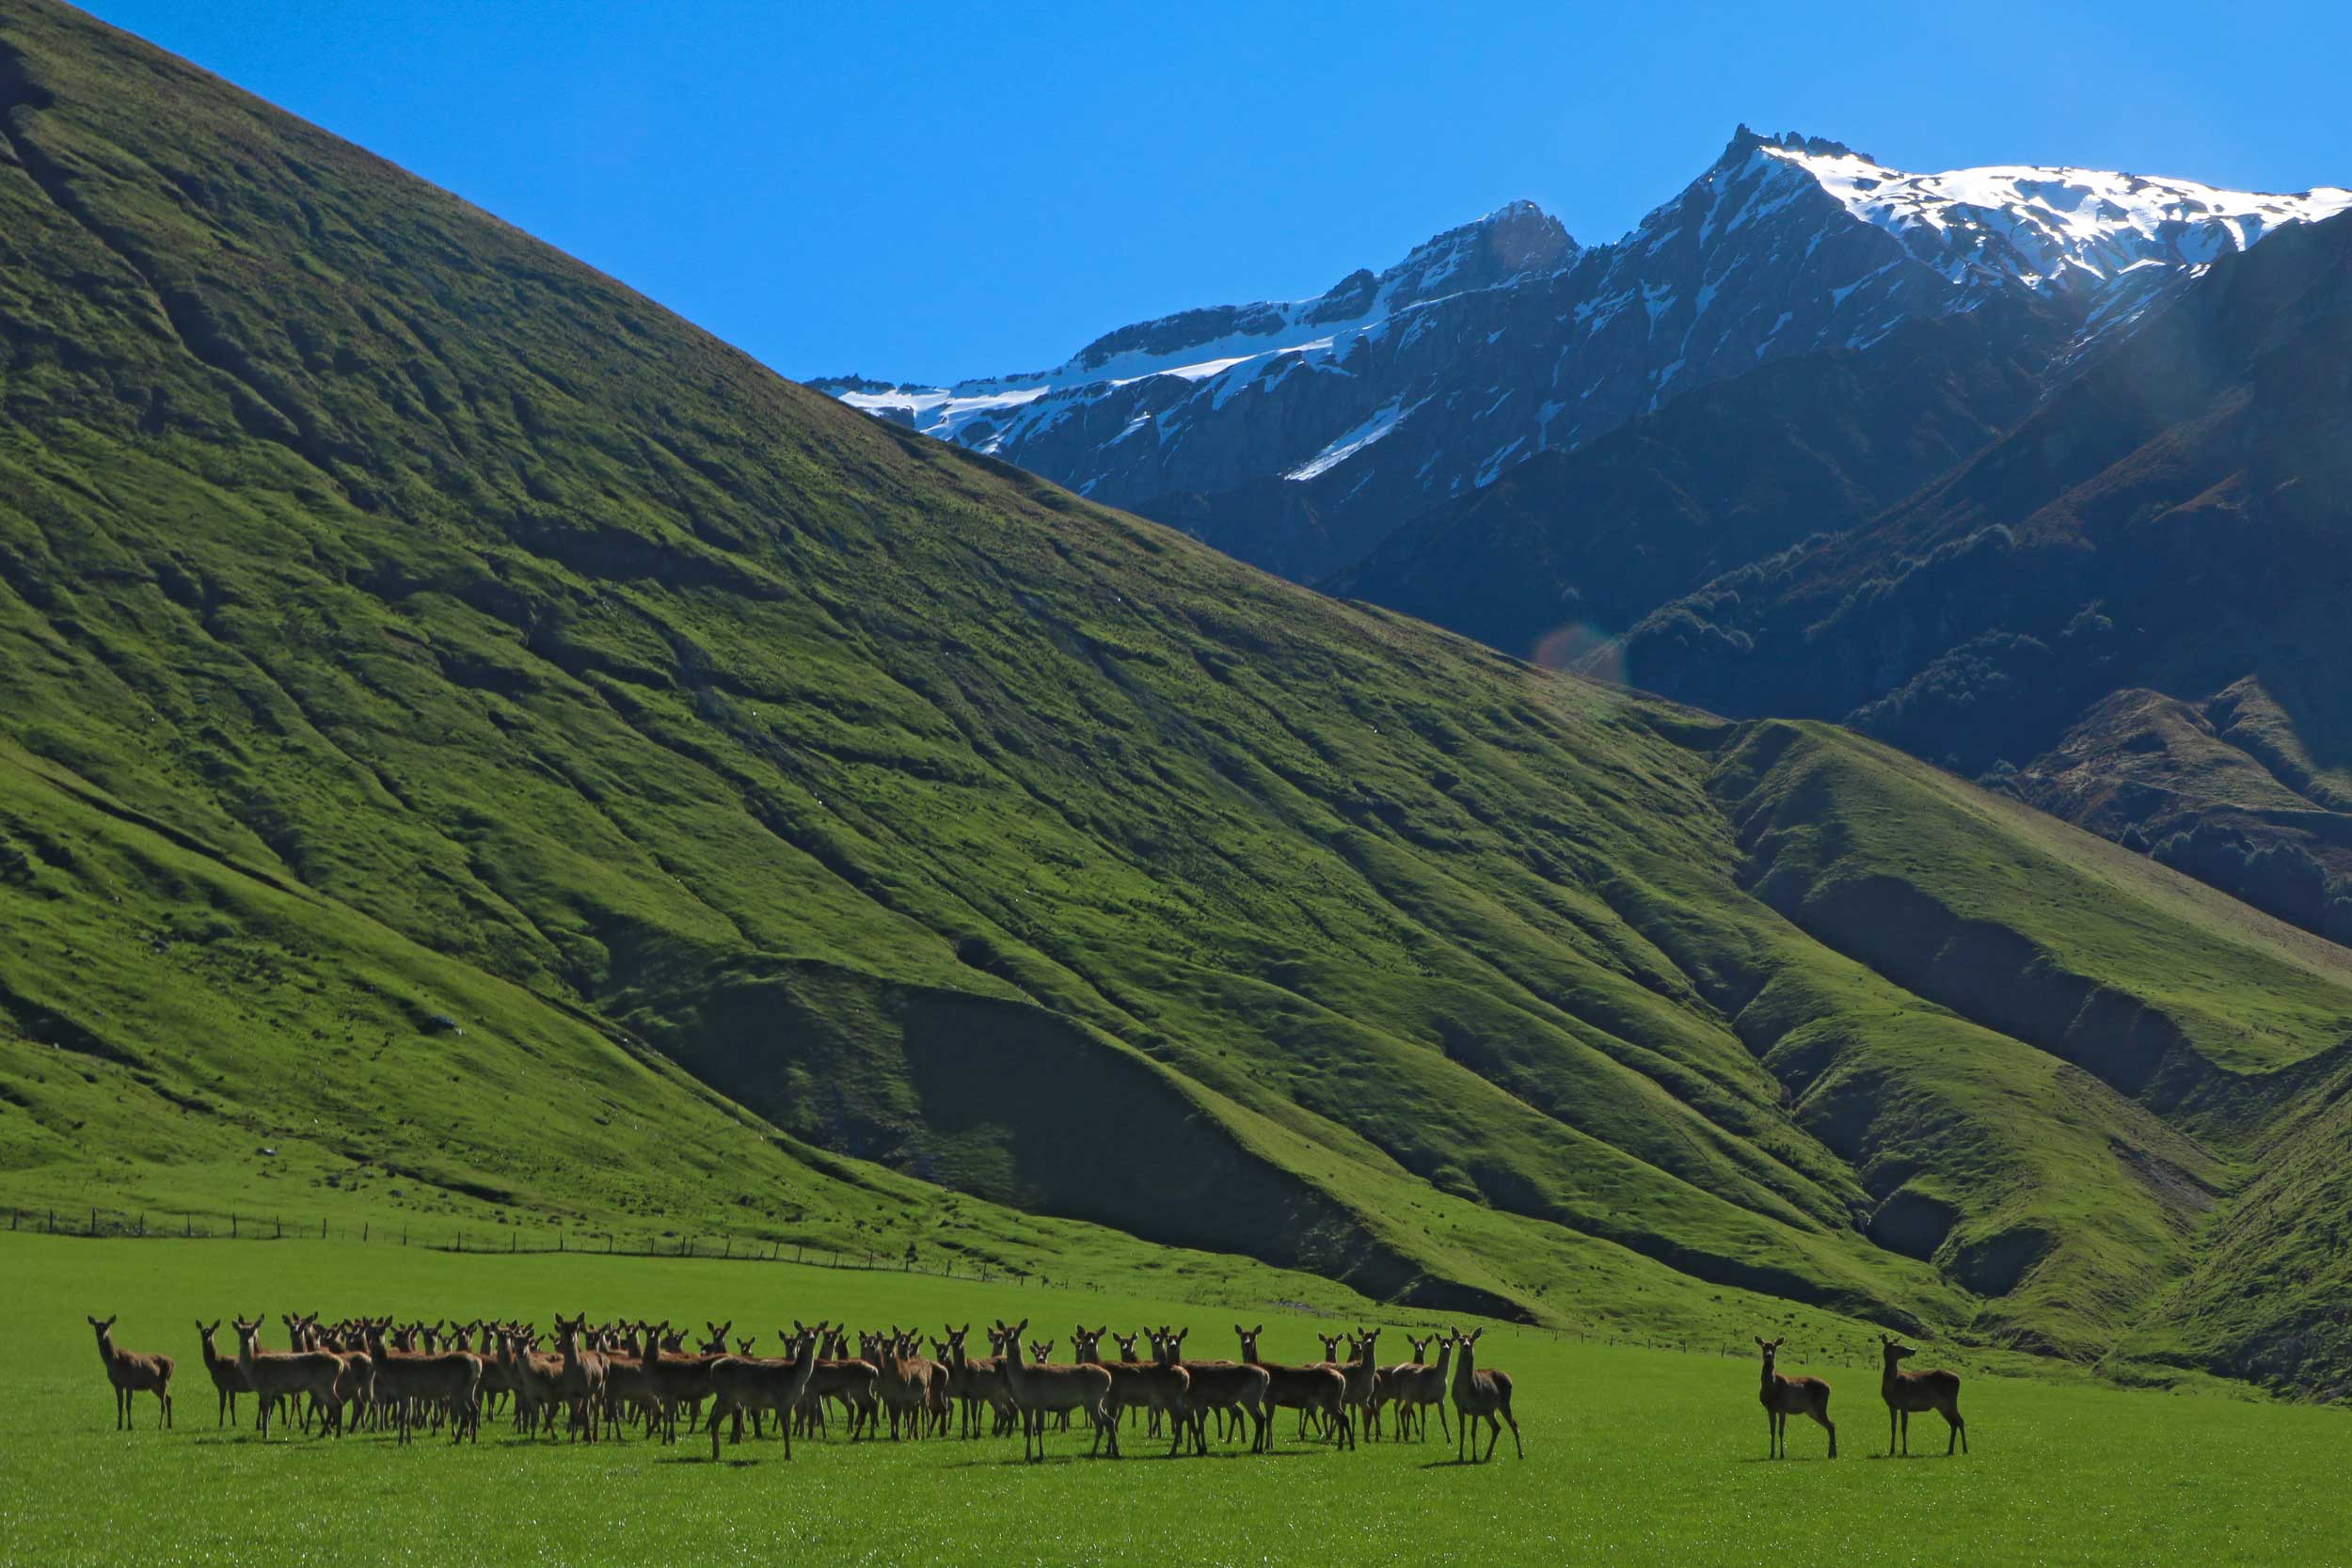 A herd of deer at the base of a very green mountain with all heads turned to look at the camera, Wanaka, New Zealand